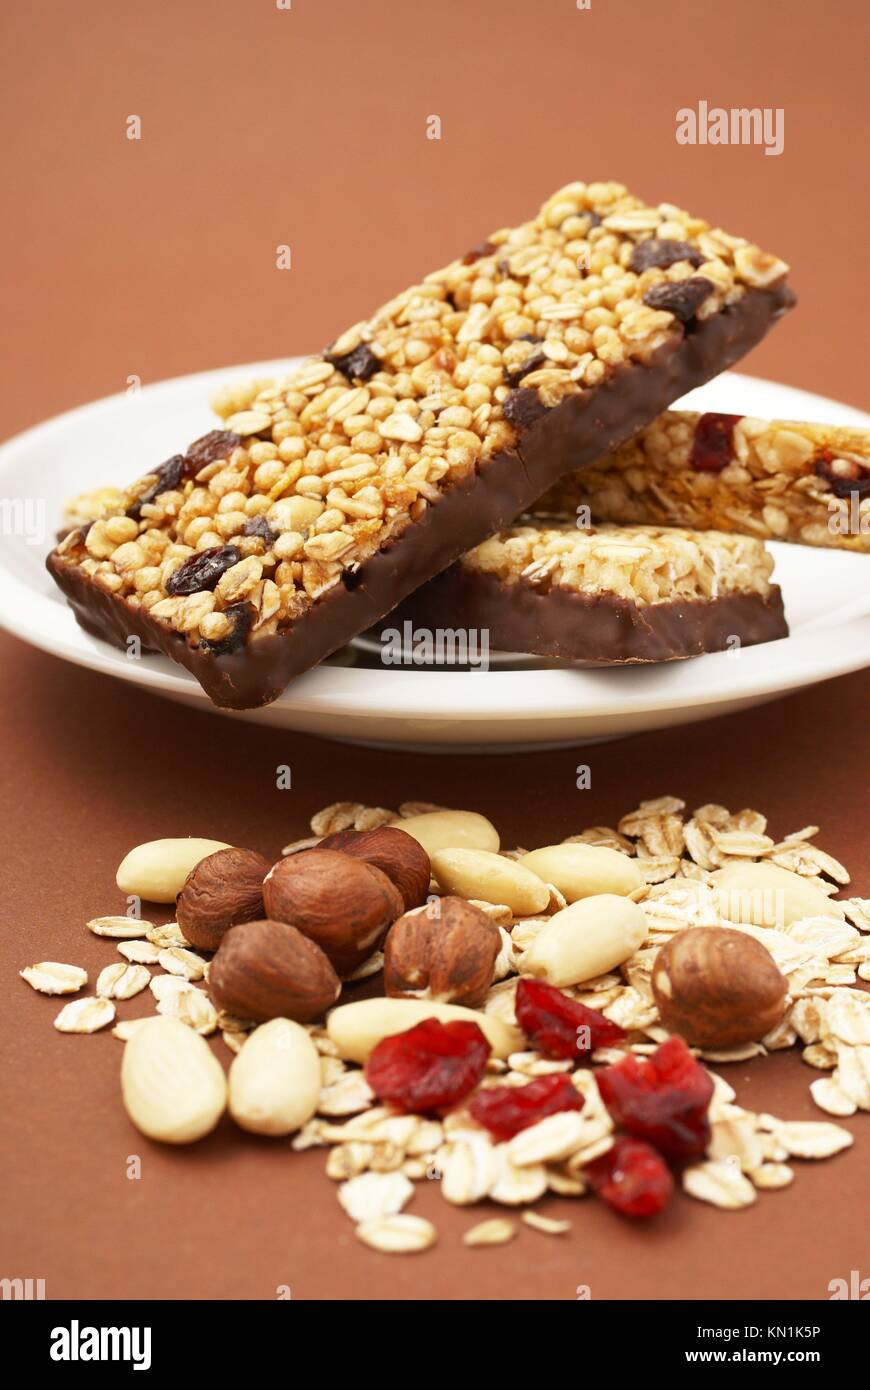 Granola bar, almonds, nuts, dry cranberries, oat flakes and glass of milk. Stock Photo